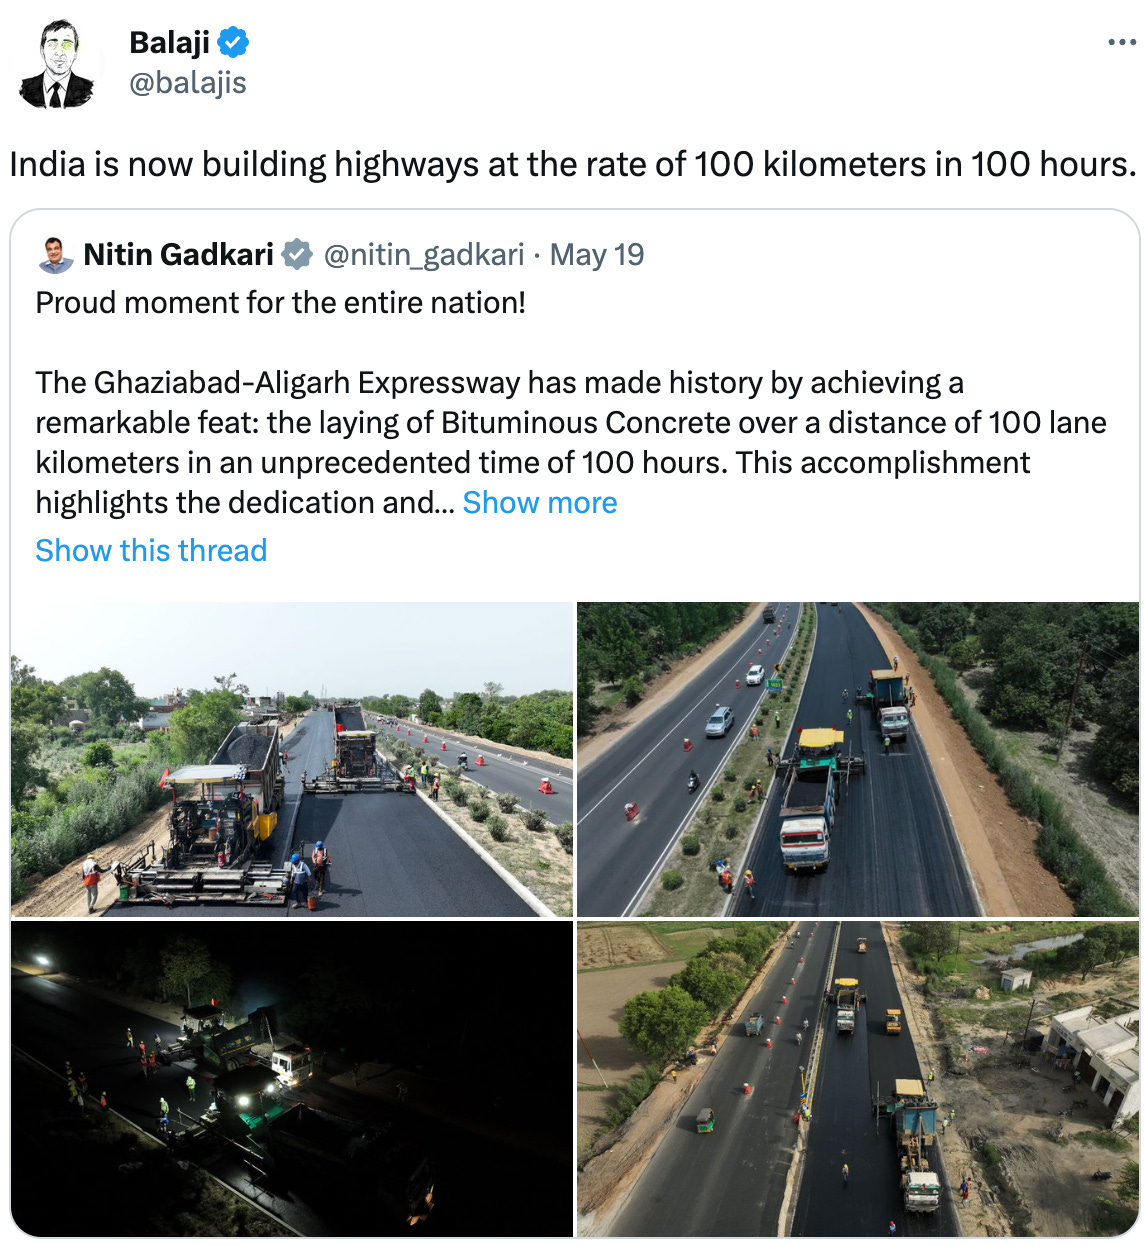  Balaji @balajis India is now building highways at the rate of 100 kilometers in 100 hours. Quote Tweet Nitin Gadkari @nitin_gadkari · May 19 Proud moment for the entire nation!  The Ghaziabad-Aligarh Expressway has made history by achieving a remarkable feat: the laying of Bituminous Concrete over a distance of 100 lane kilometers in an unprecedented time of 100 hours. This accomplishment highlights the dedication and… Show more